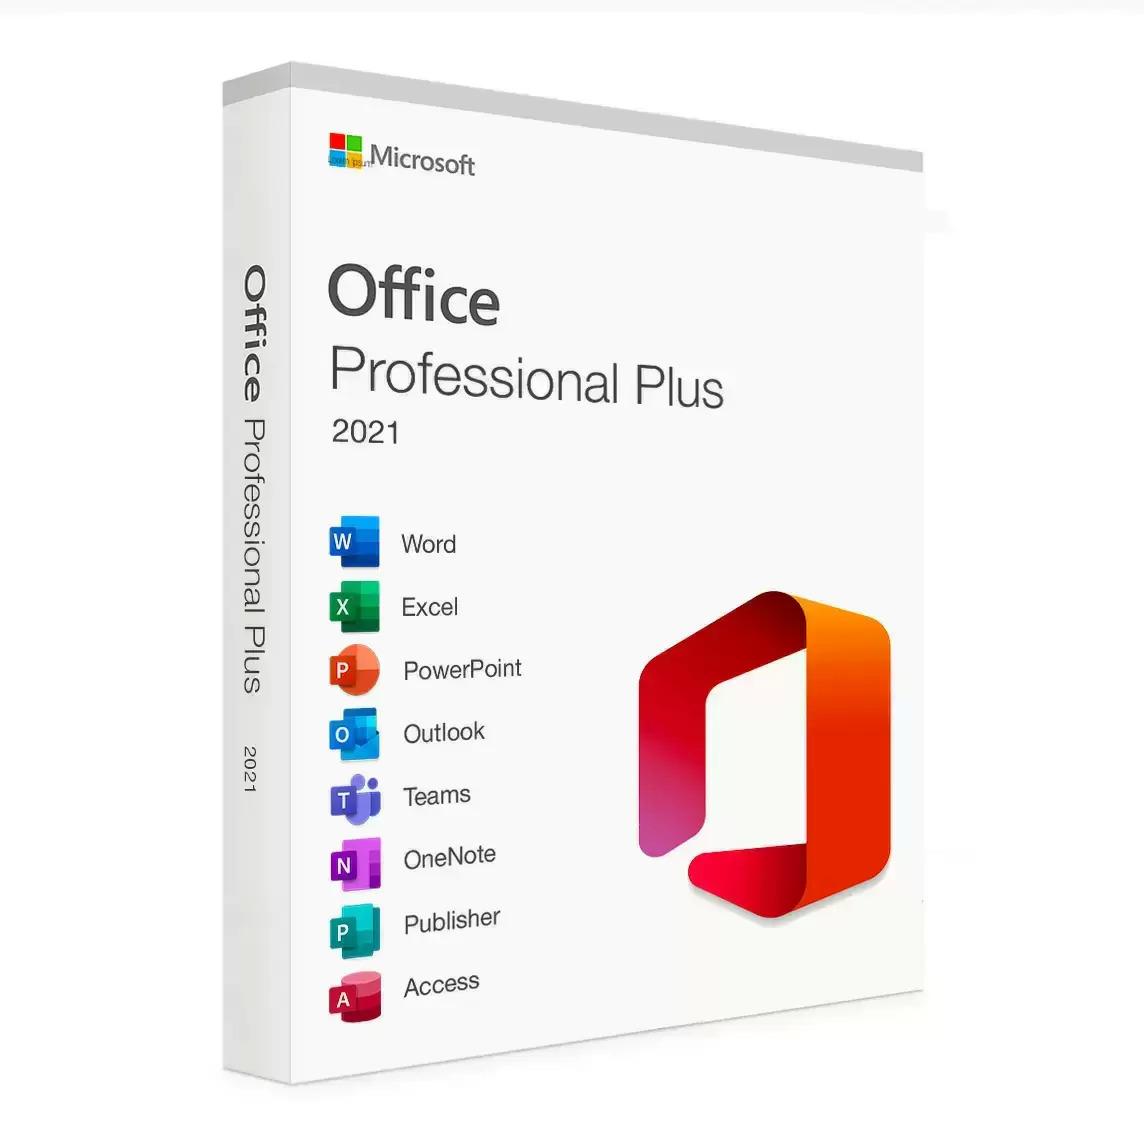 Microsoft Office Professional Plus 2021 Lifetime License for $14.98